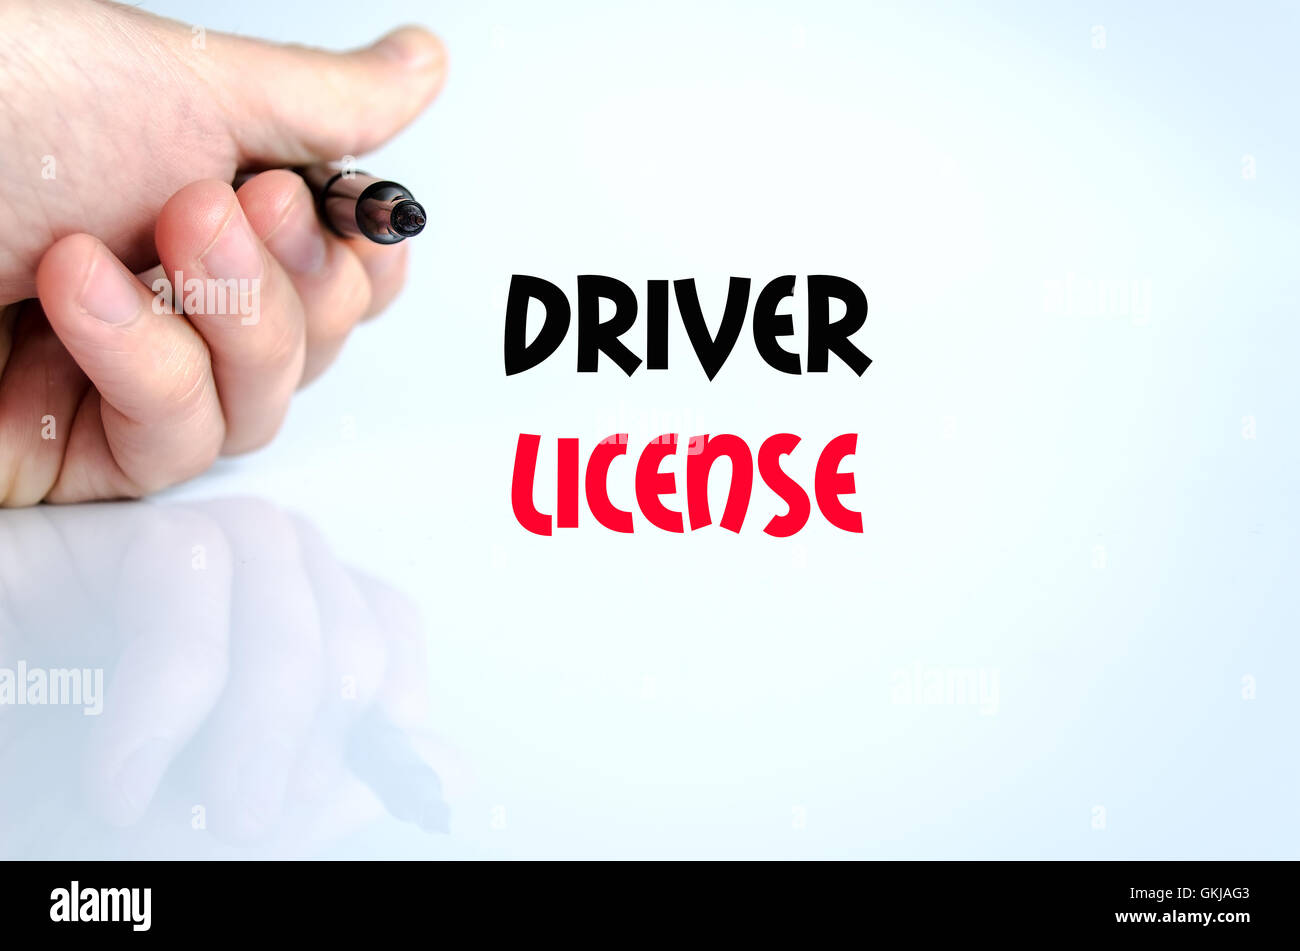 Driver license text concept isolated over white background Stock Photo